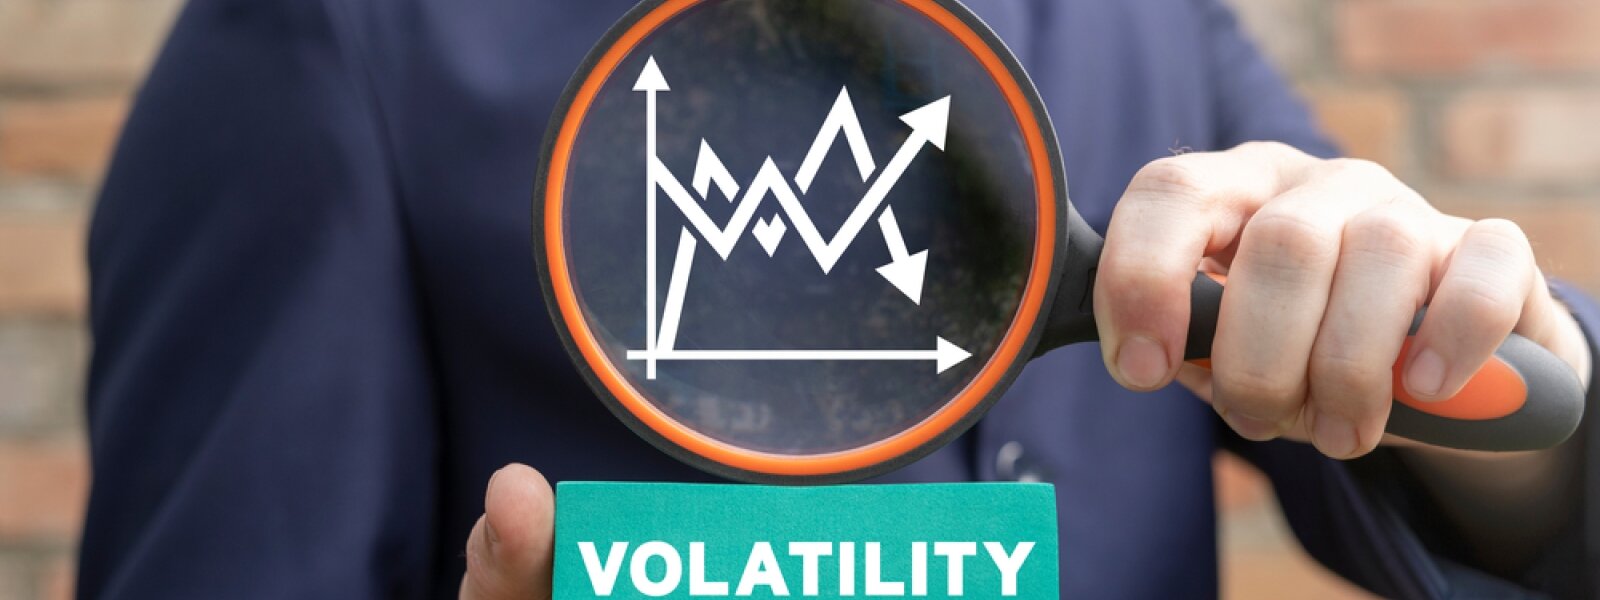 Volatility of the market : what an investor should know